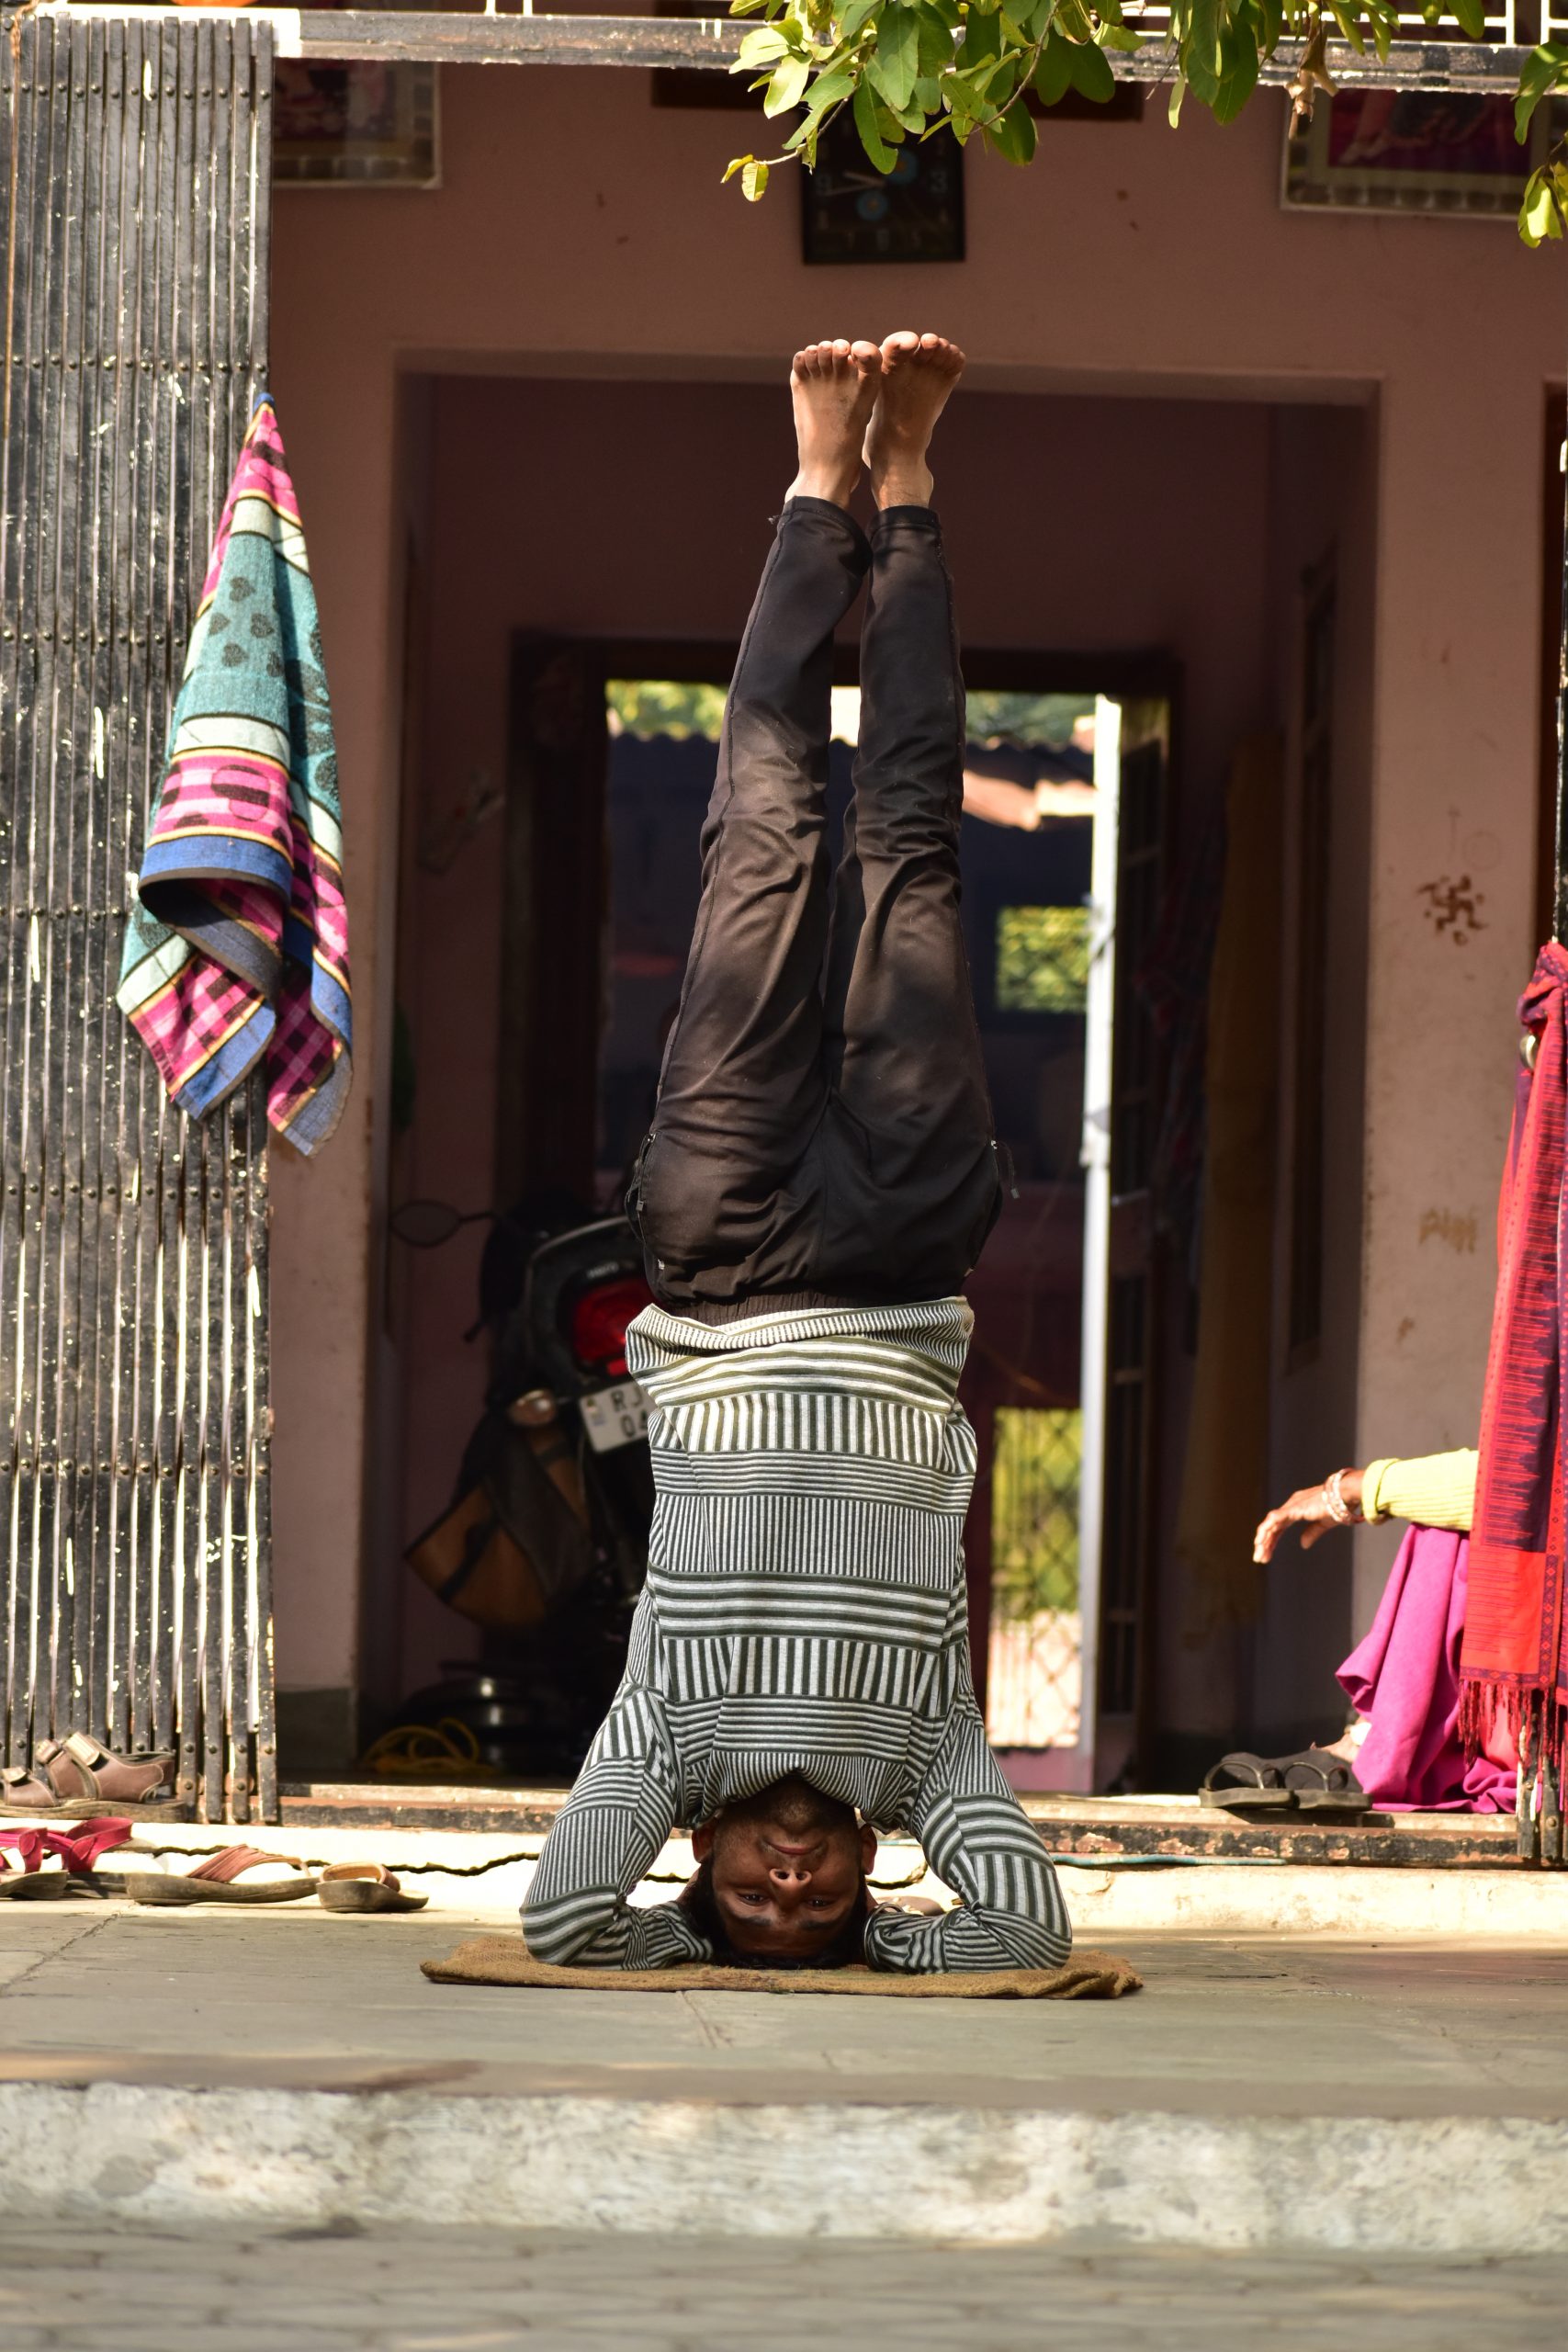 A man practicing head stand Yoga pose